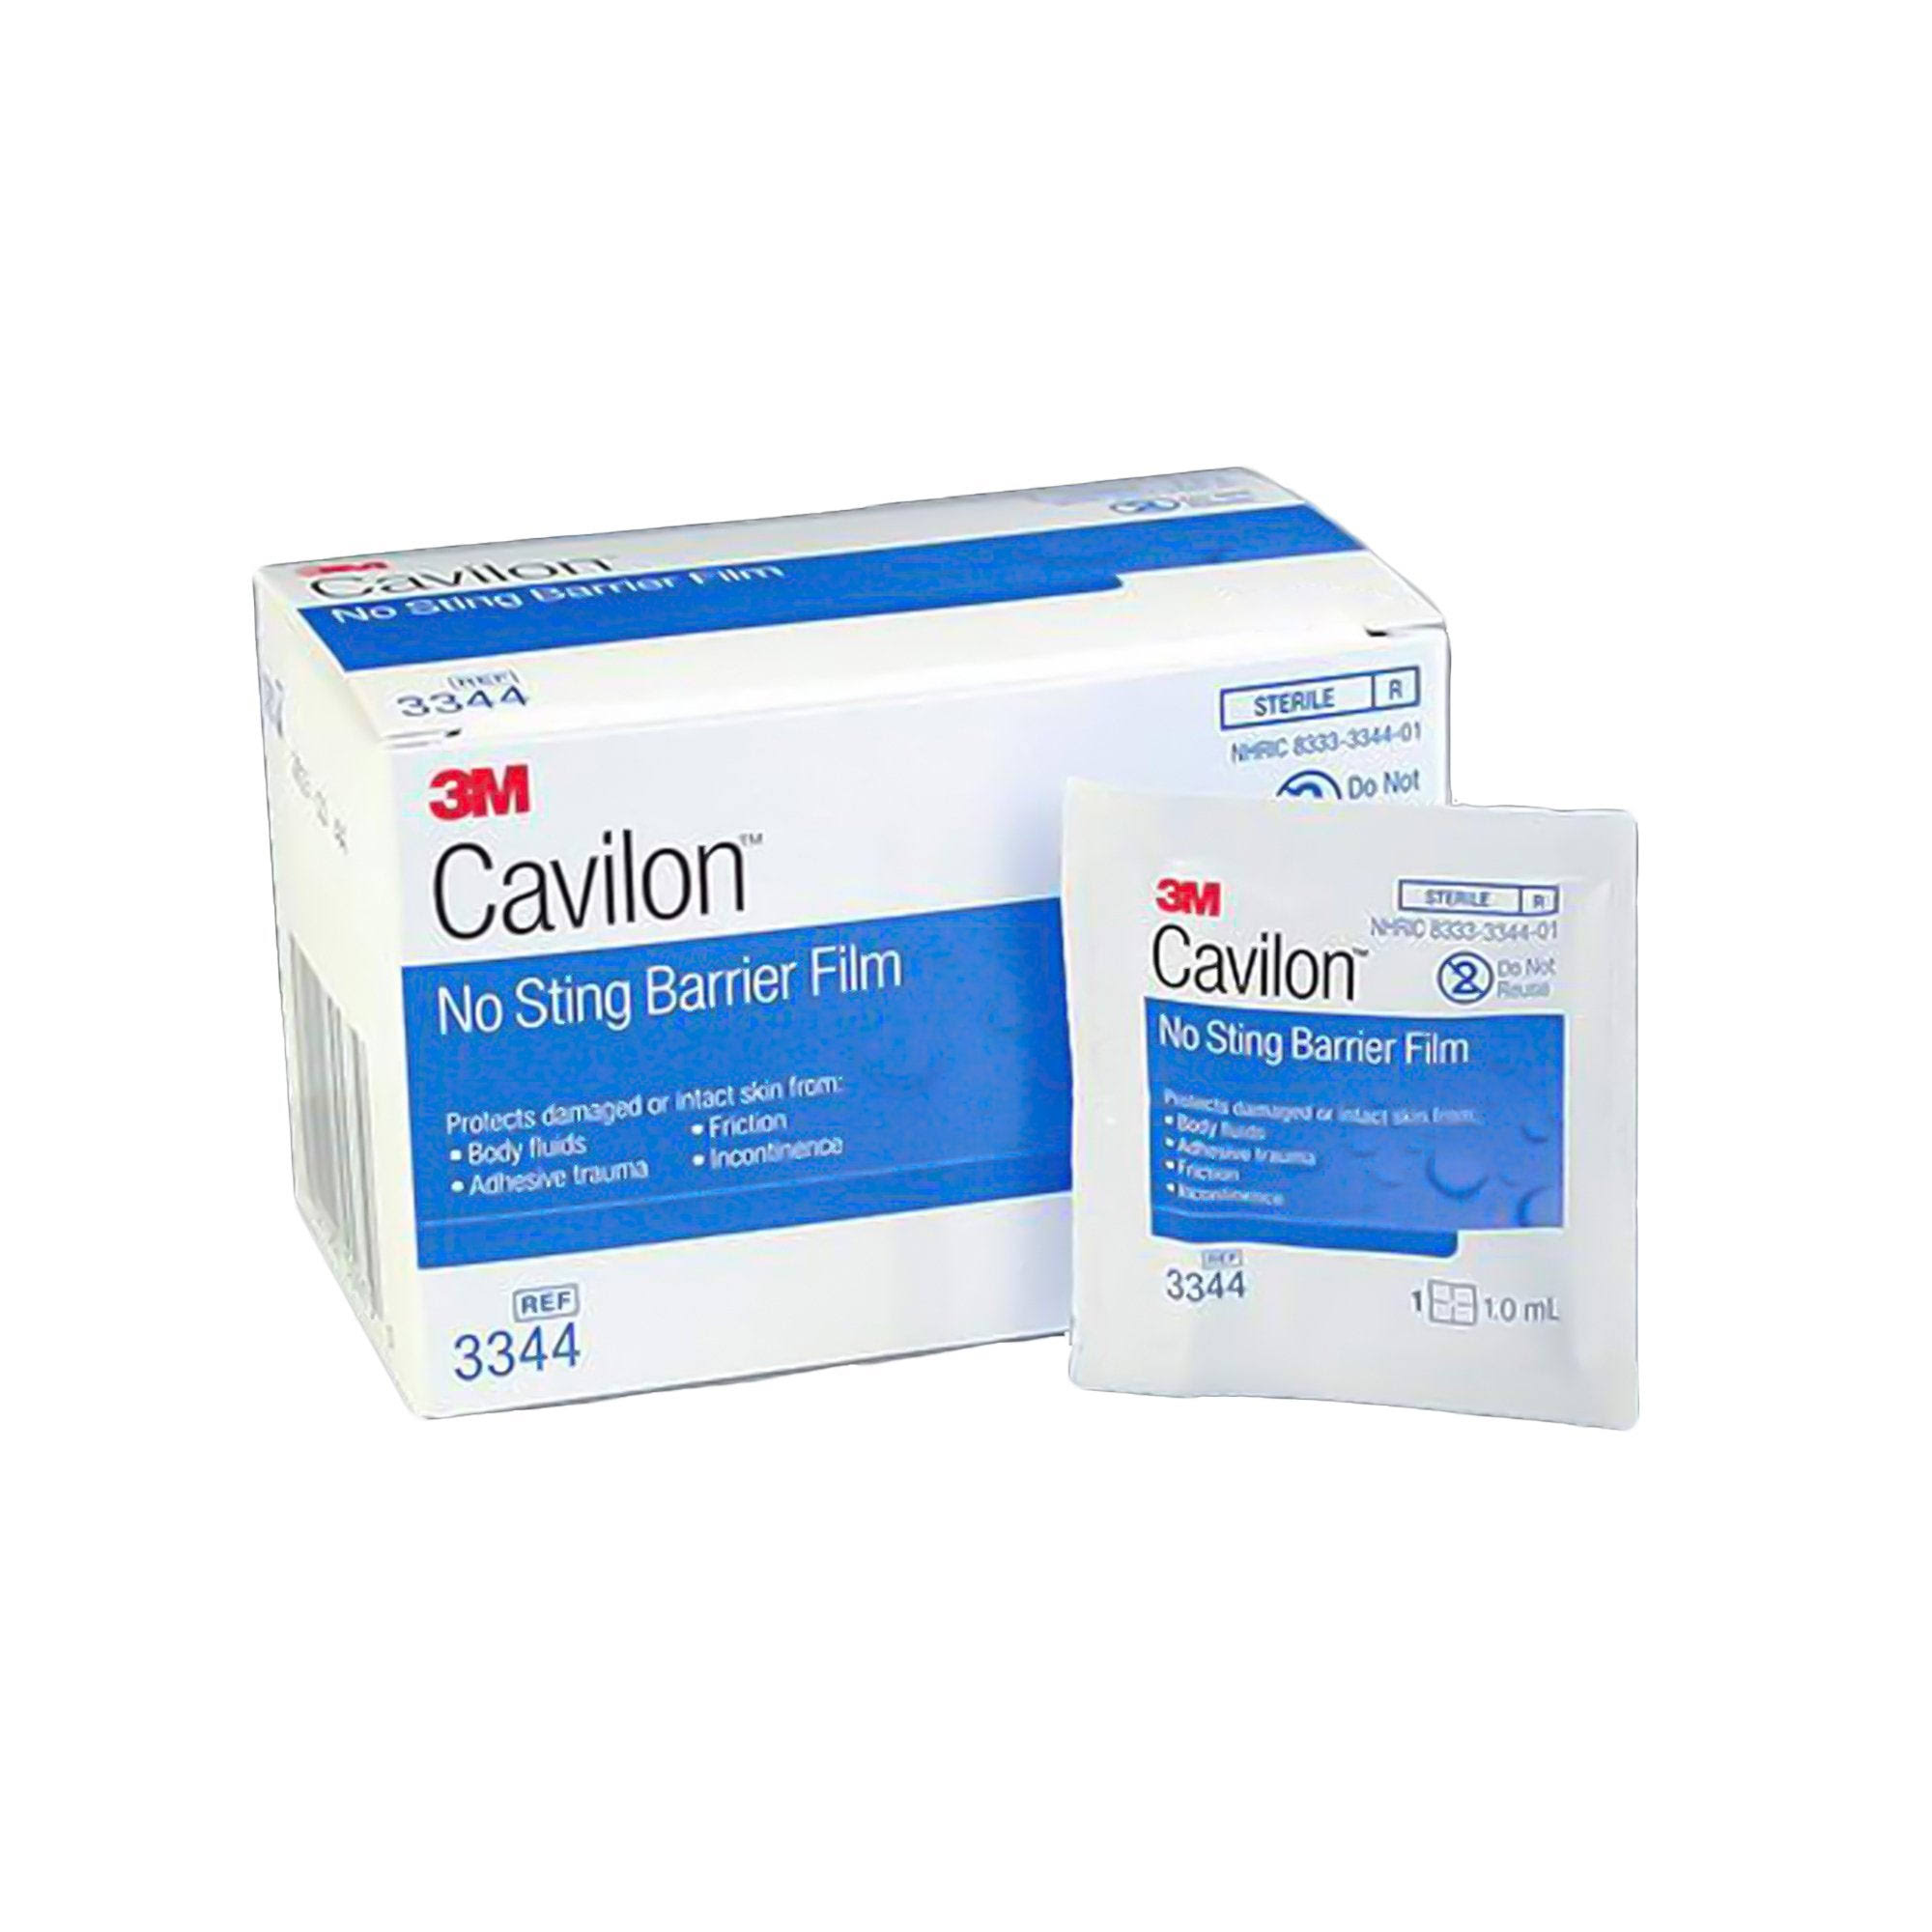 Cavilon No Sting Barrier Film by 3M 1 ml Packaged Wipes 3344